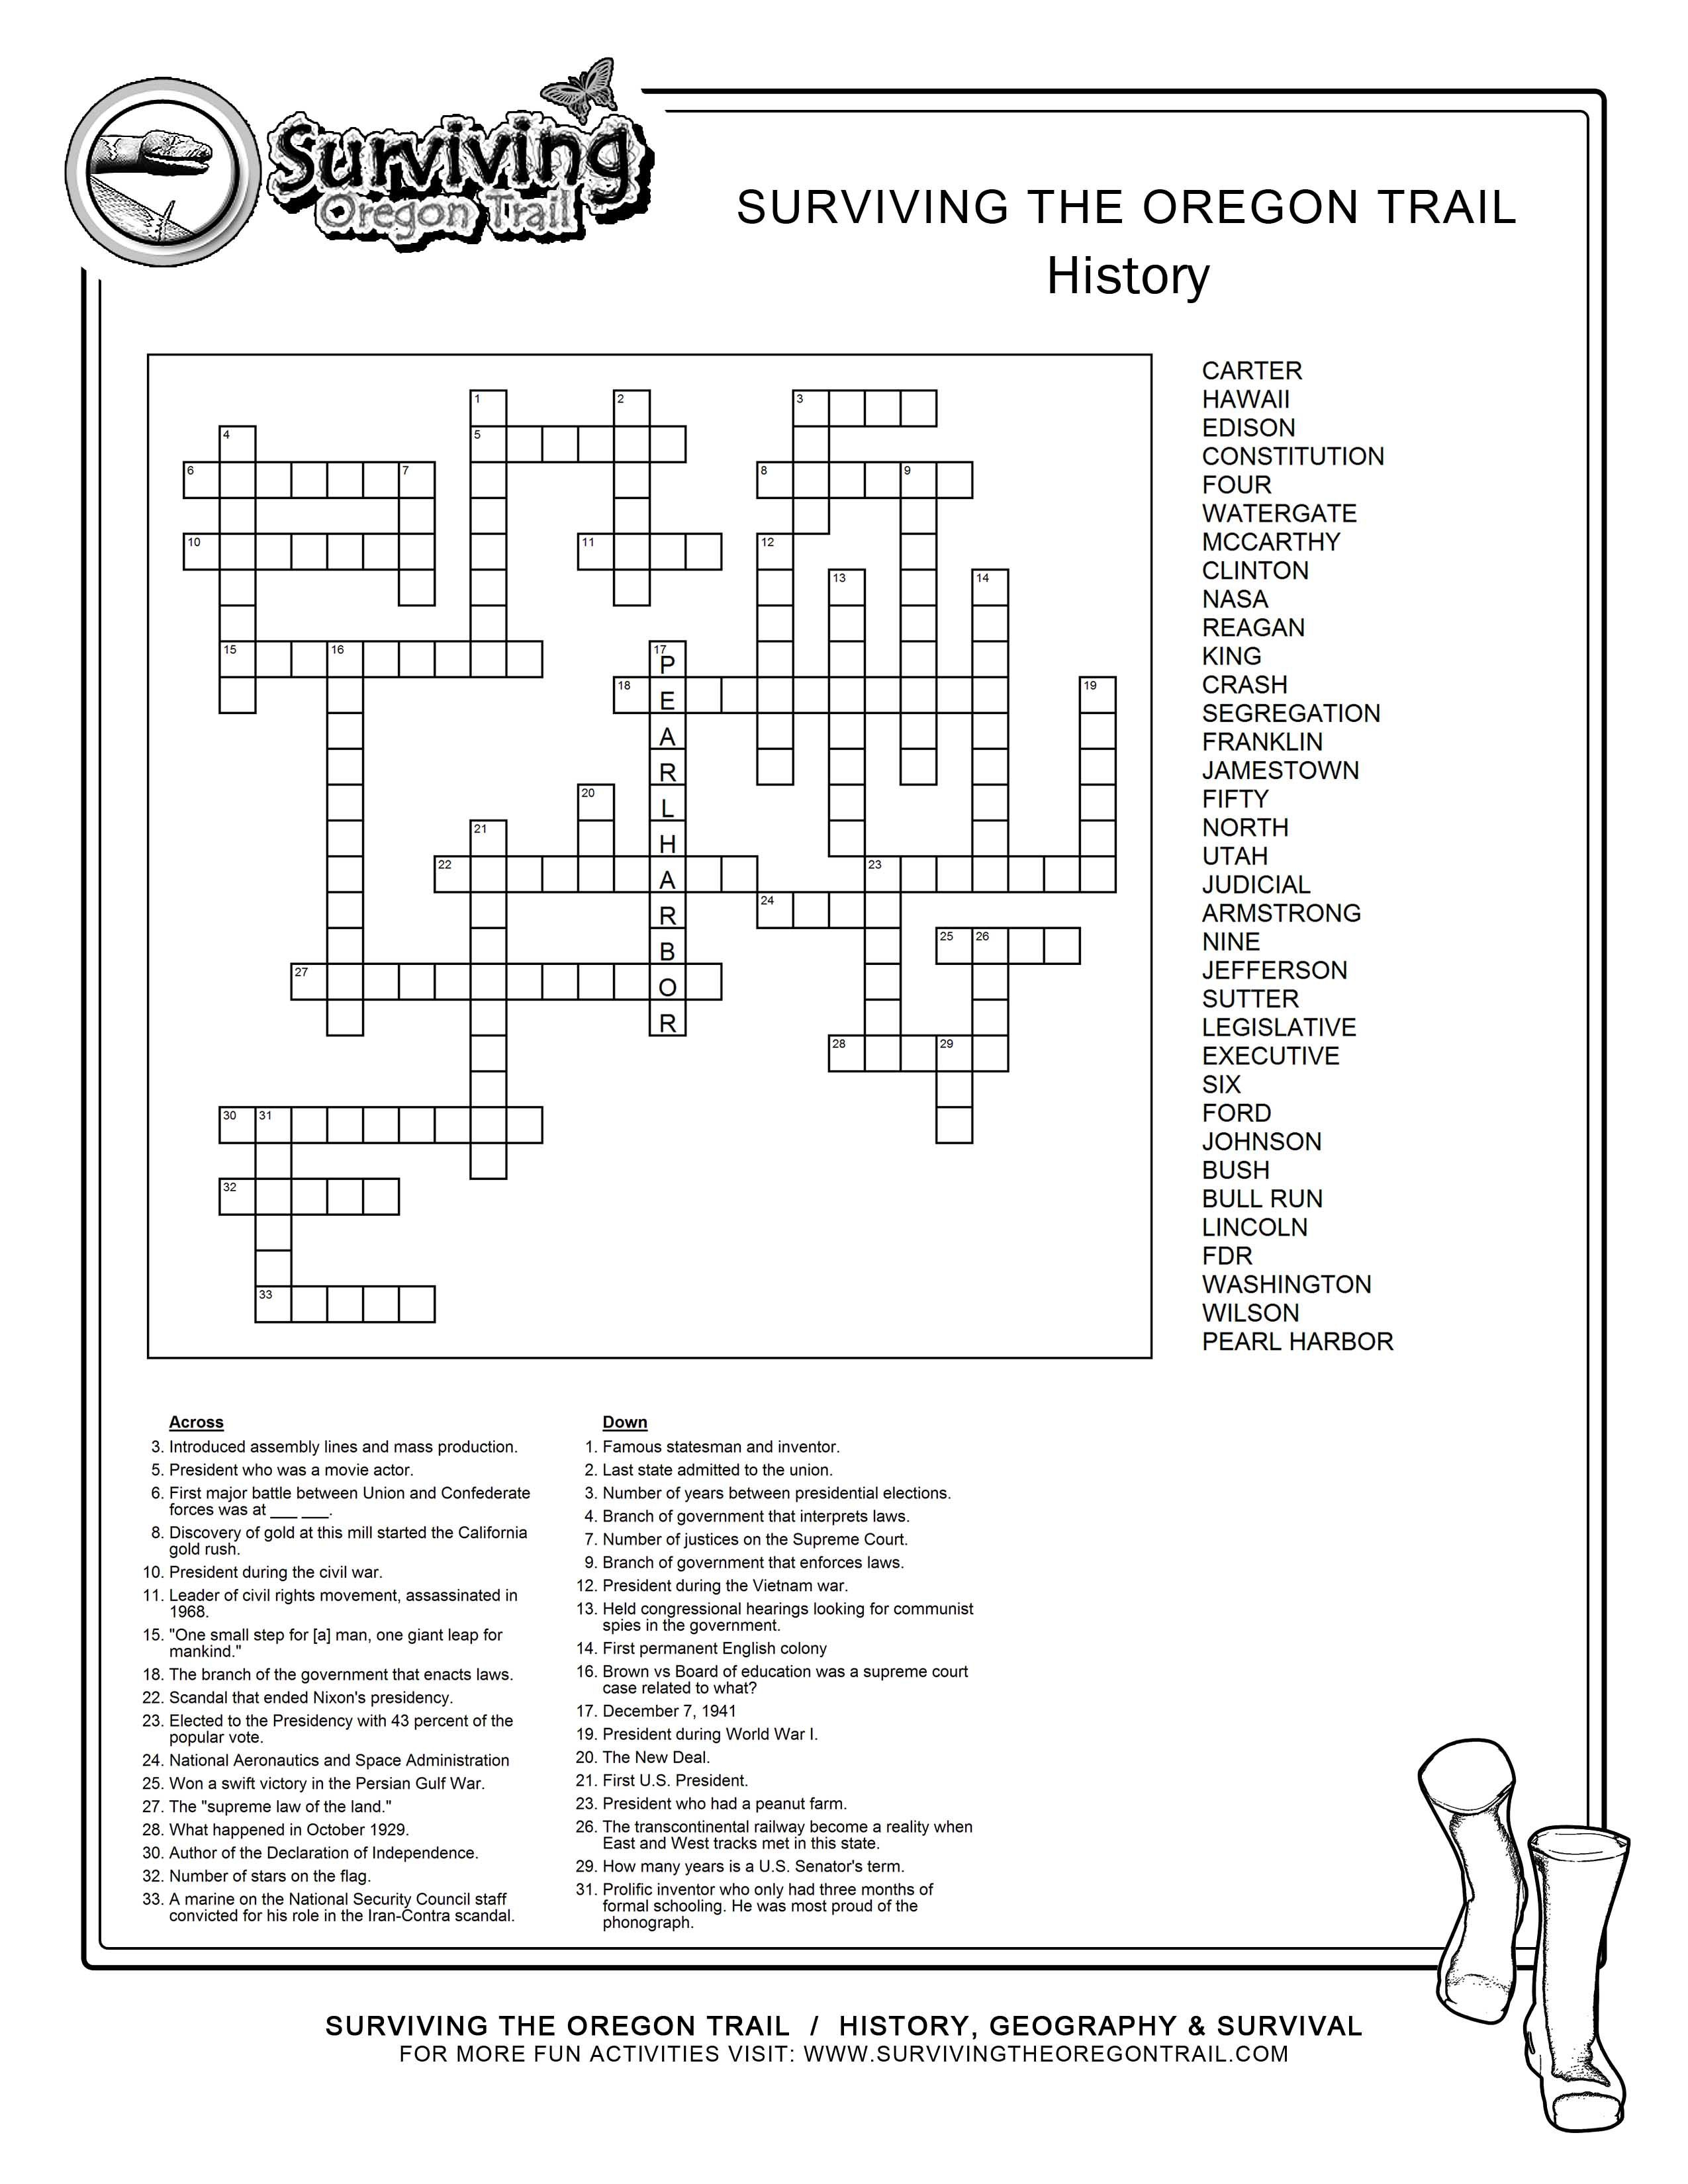 Fill Free To Save This Historical Crossword Puzzle To Your Computer - Black History Crossword Puzzle Printable